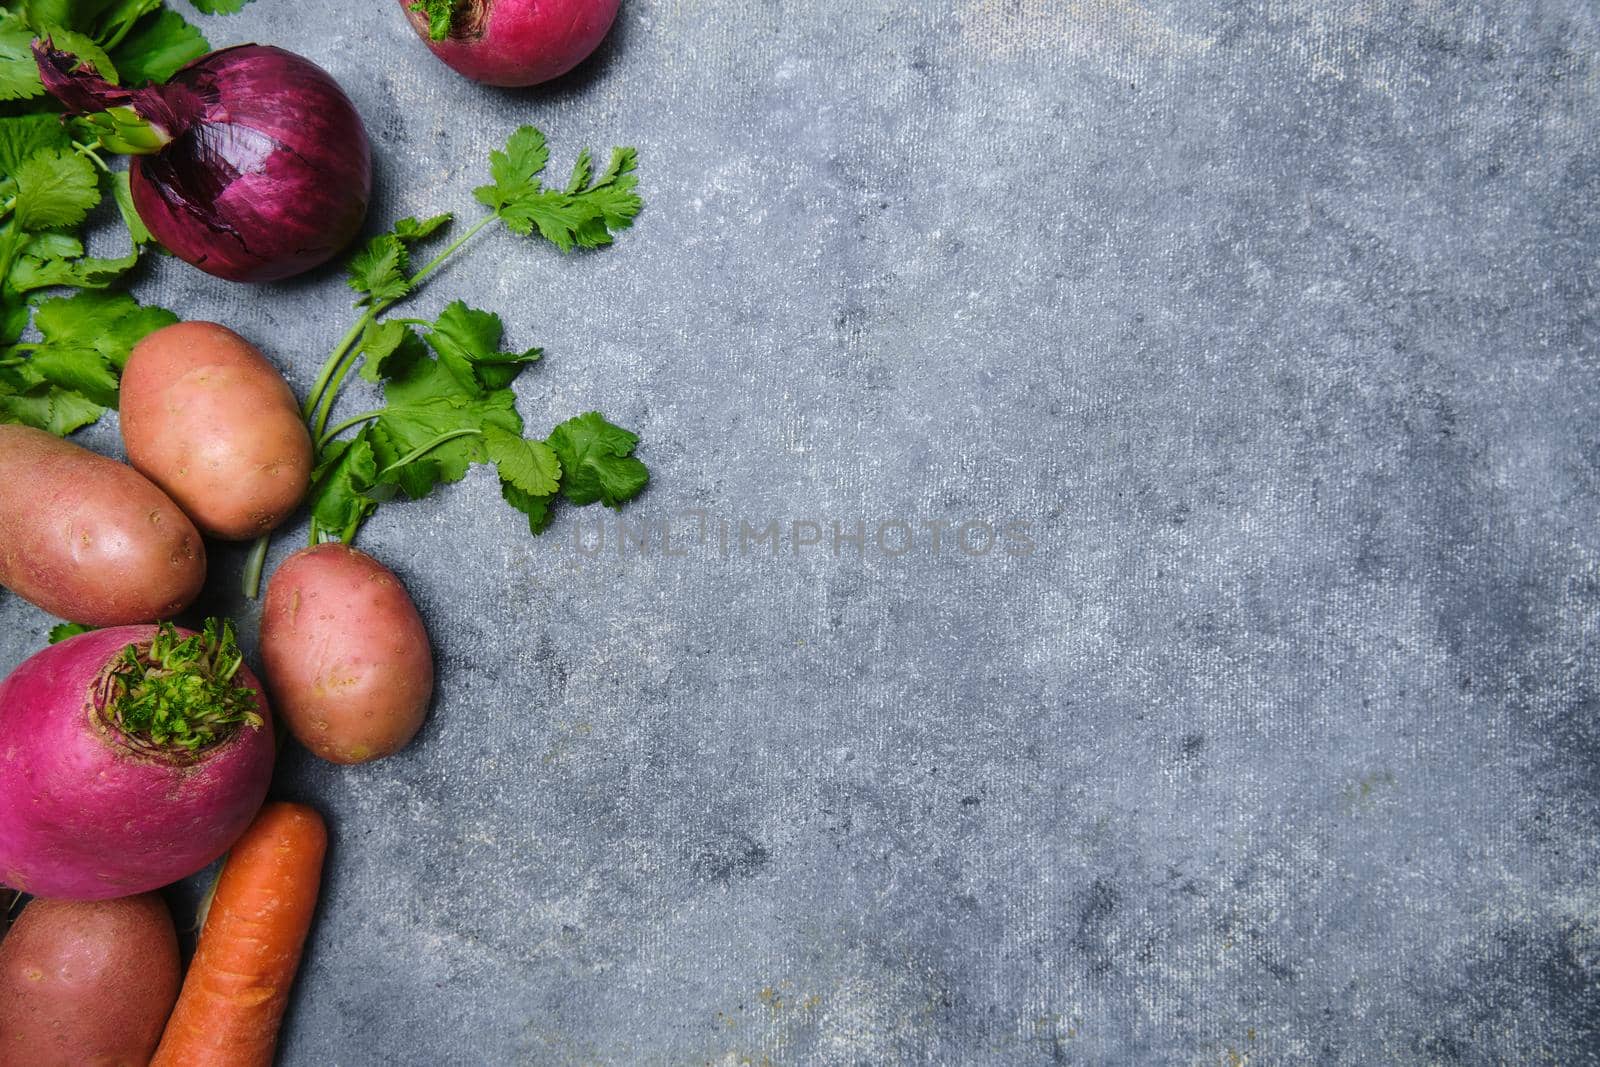 Turnip, cilantro, potatoes, carrots and red onions on a dark background